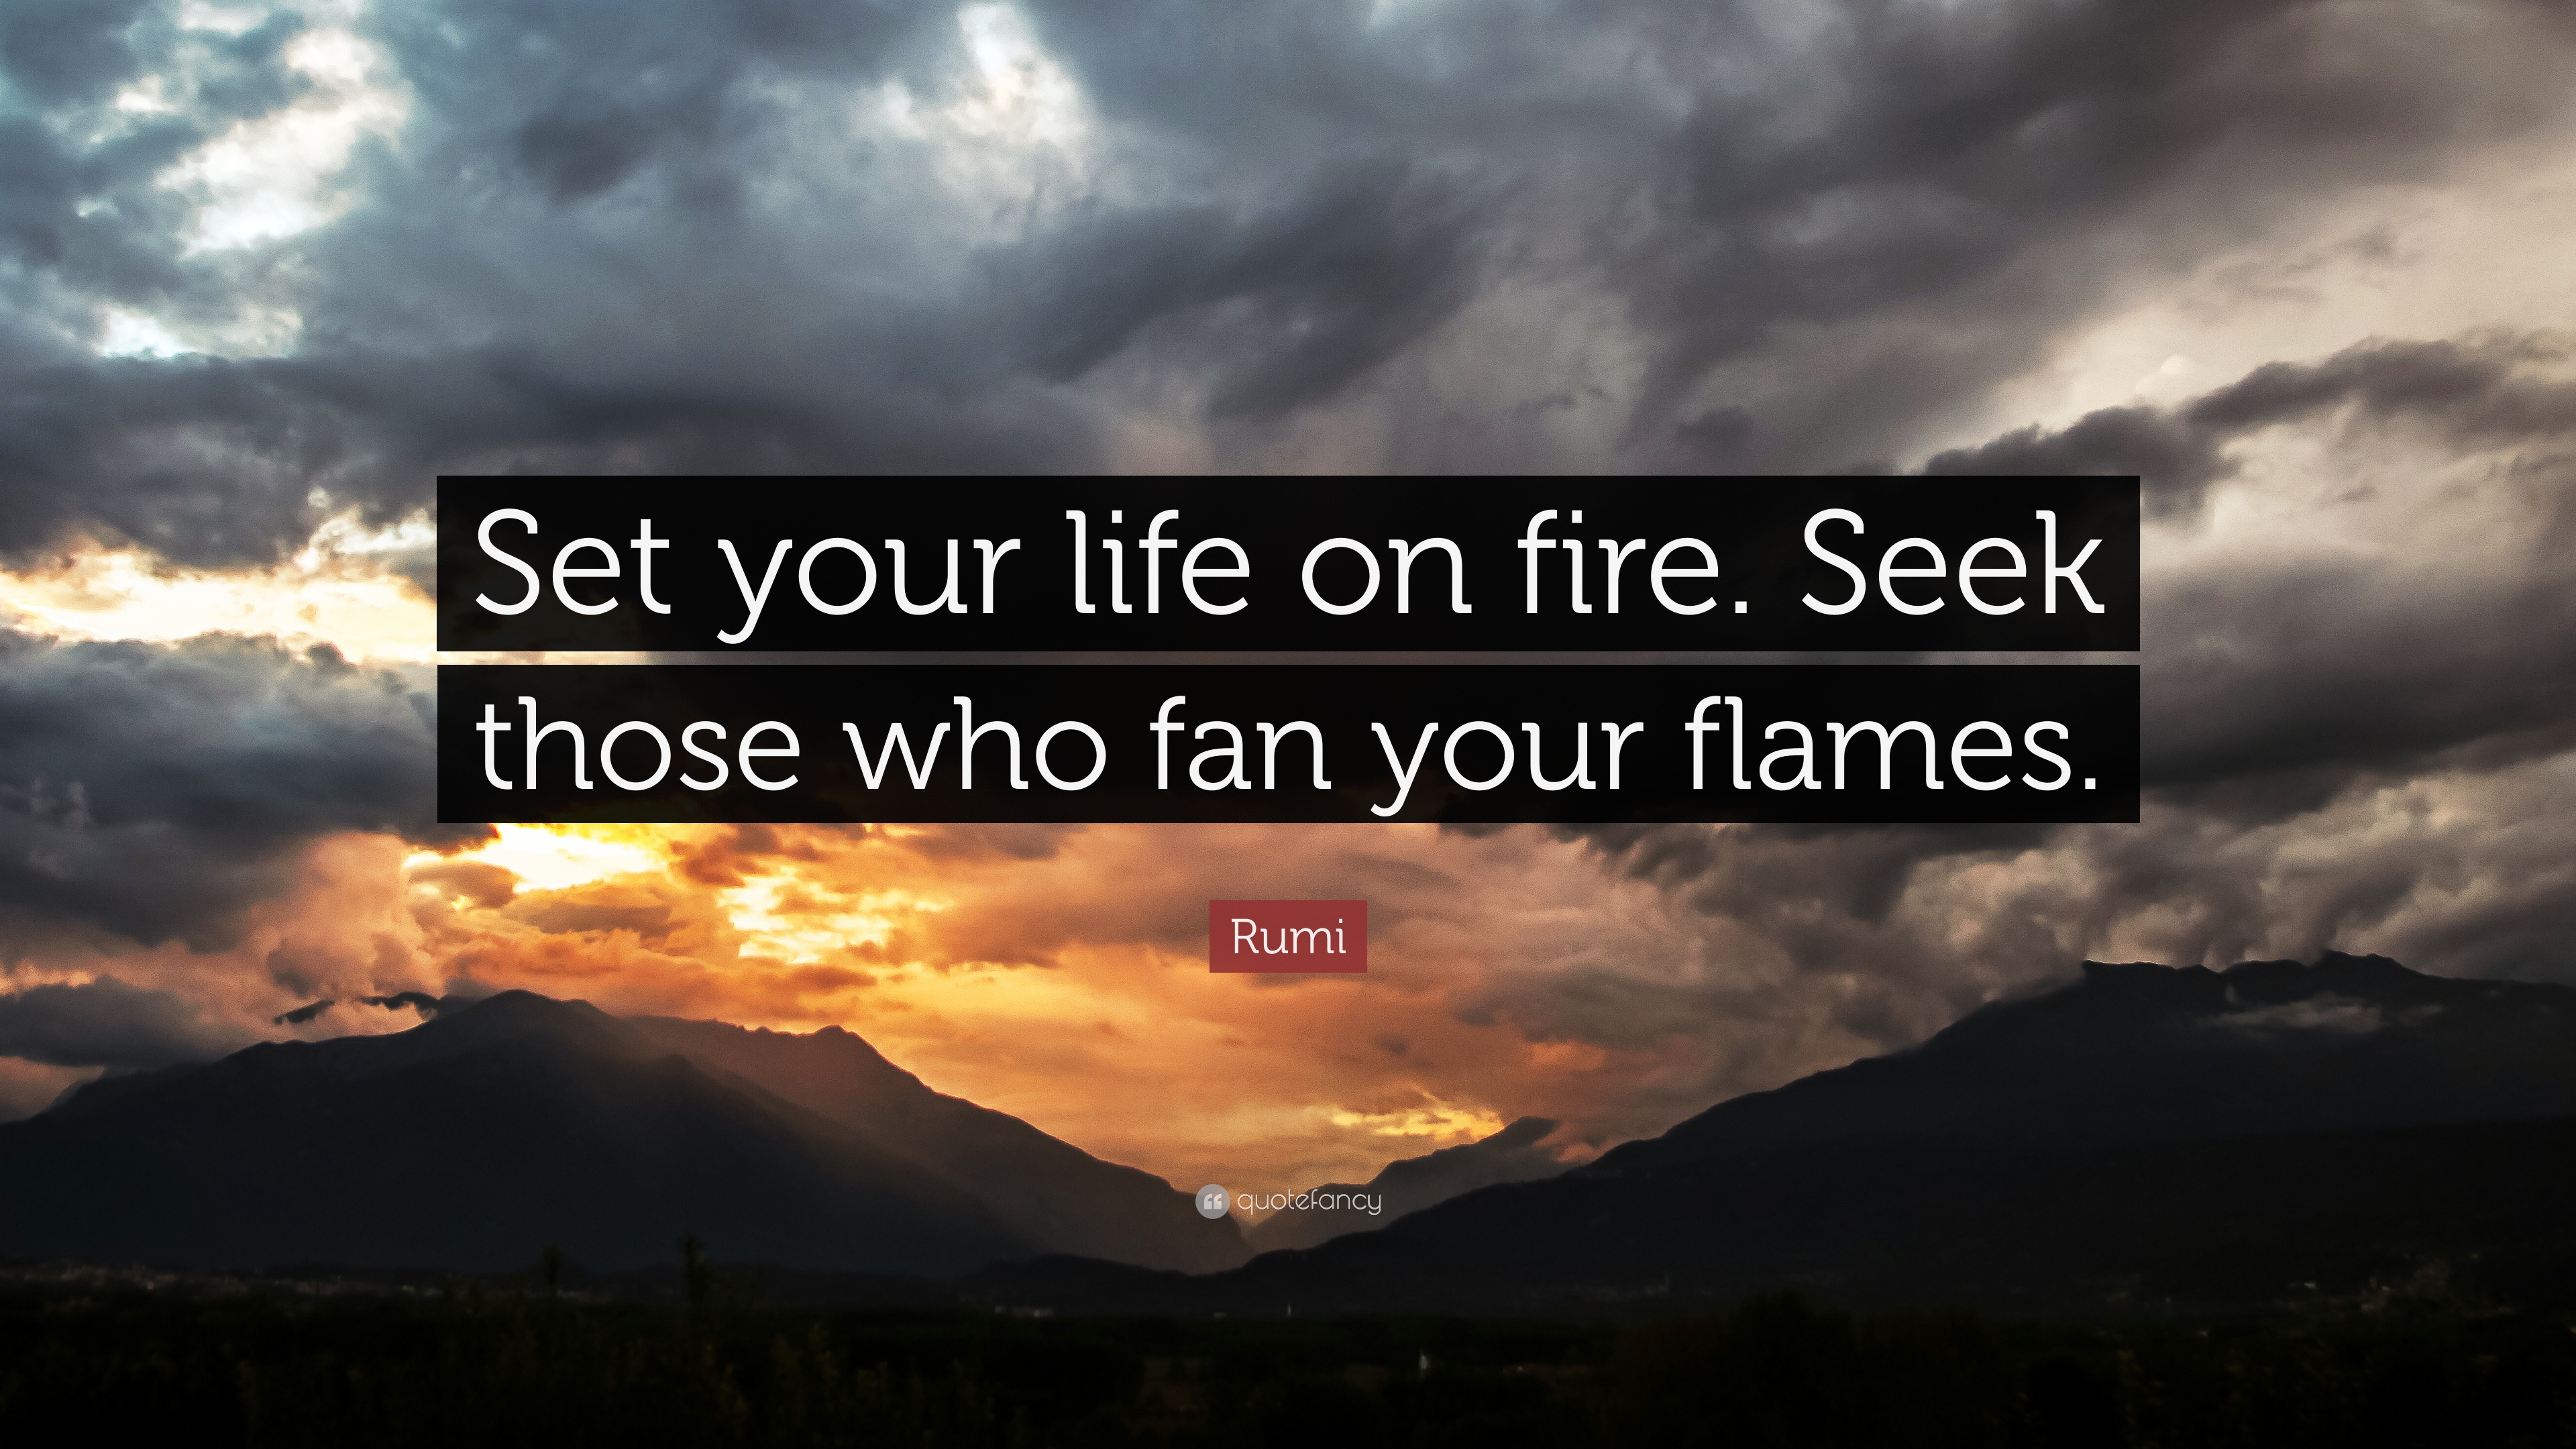 Rumi Quote: "Set your life on fire. Seek those who fan your flames." (14 wallpapers) - Quotefancy